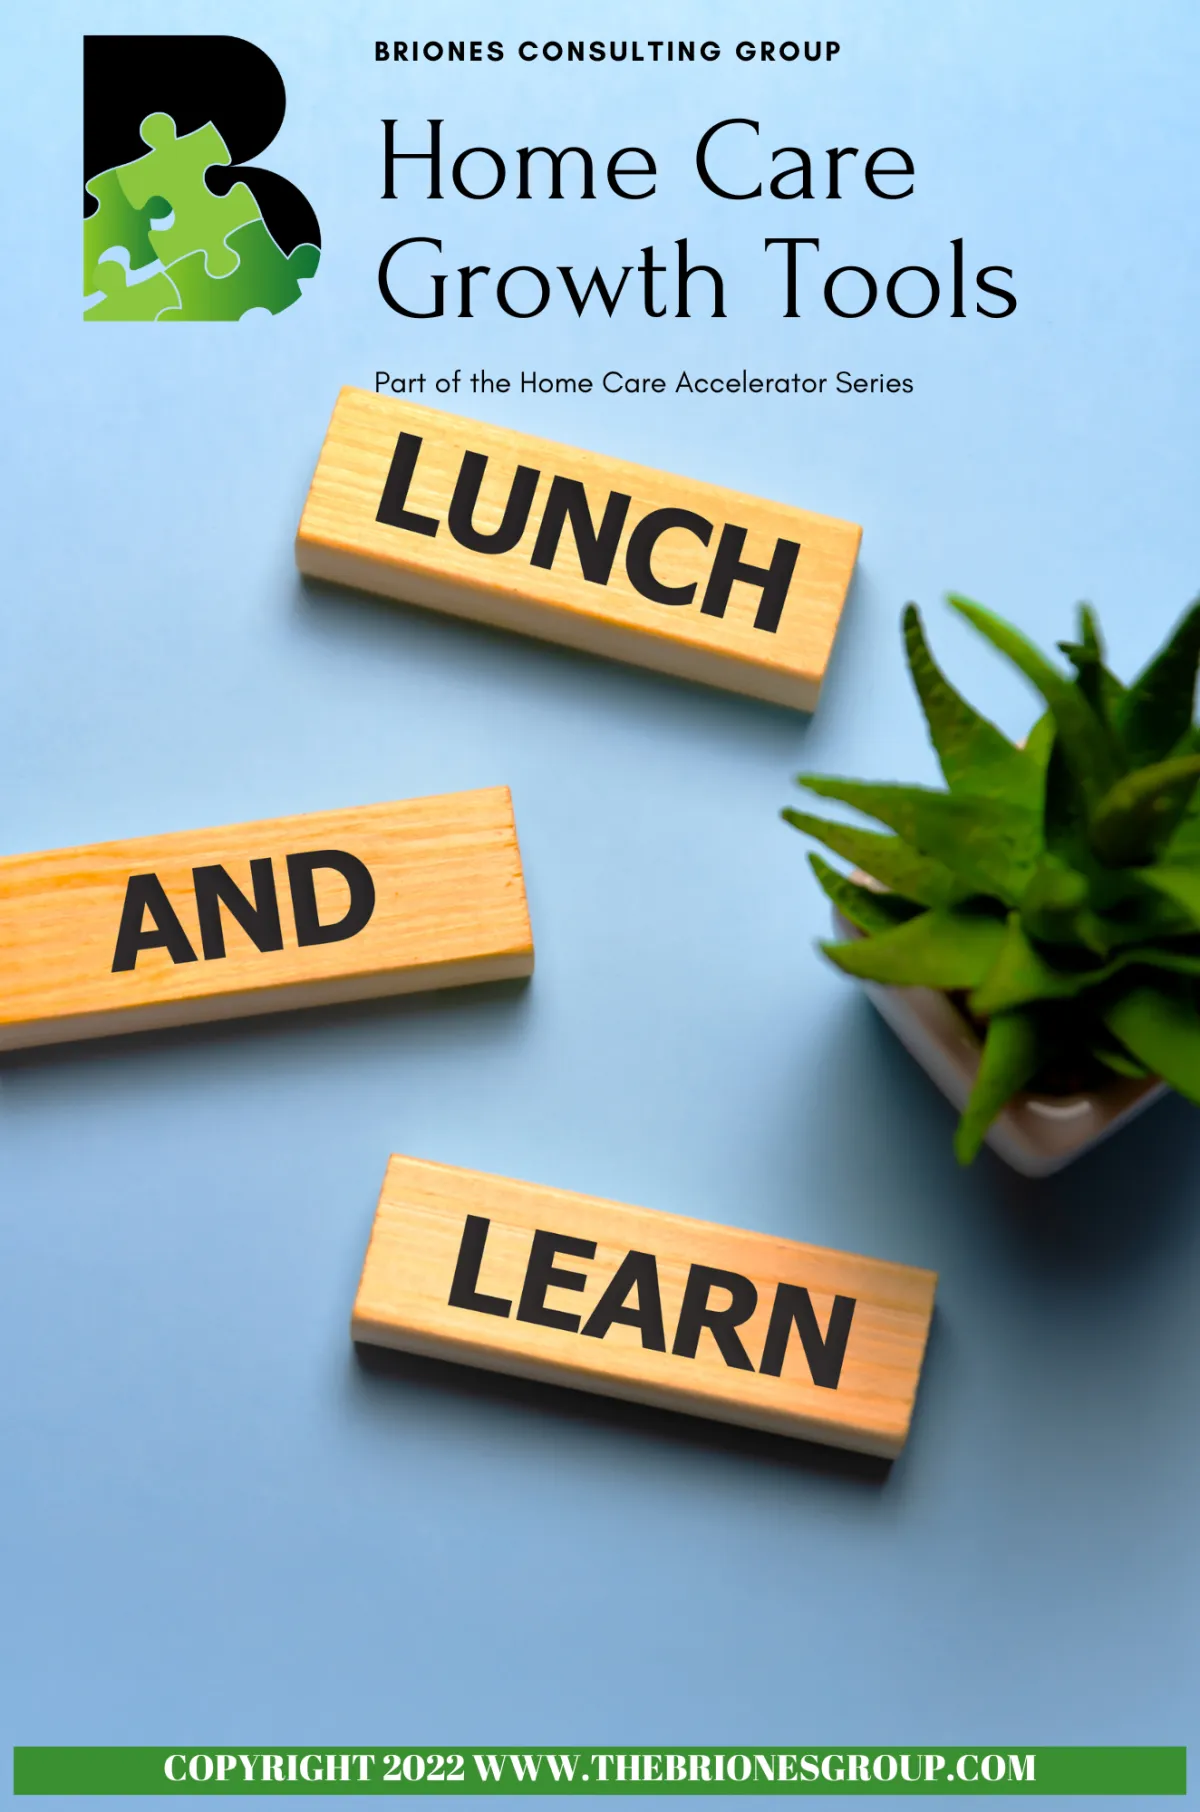 Home Care Growth Tools: Lunch and Learn by Julio Briones